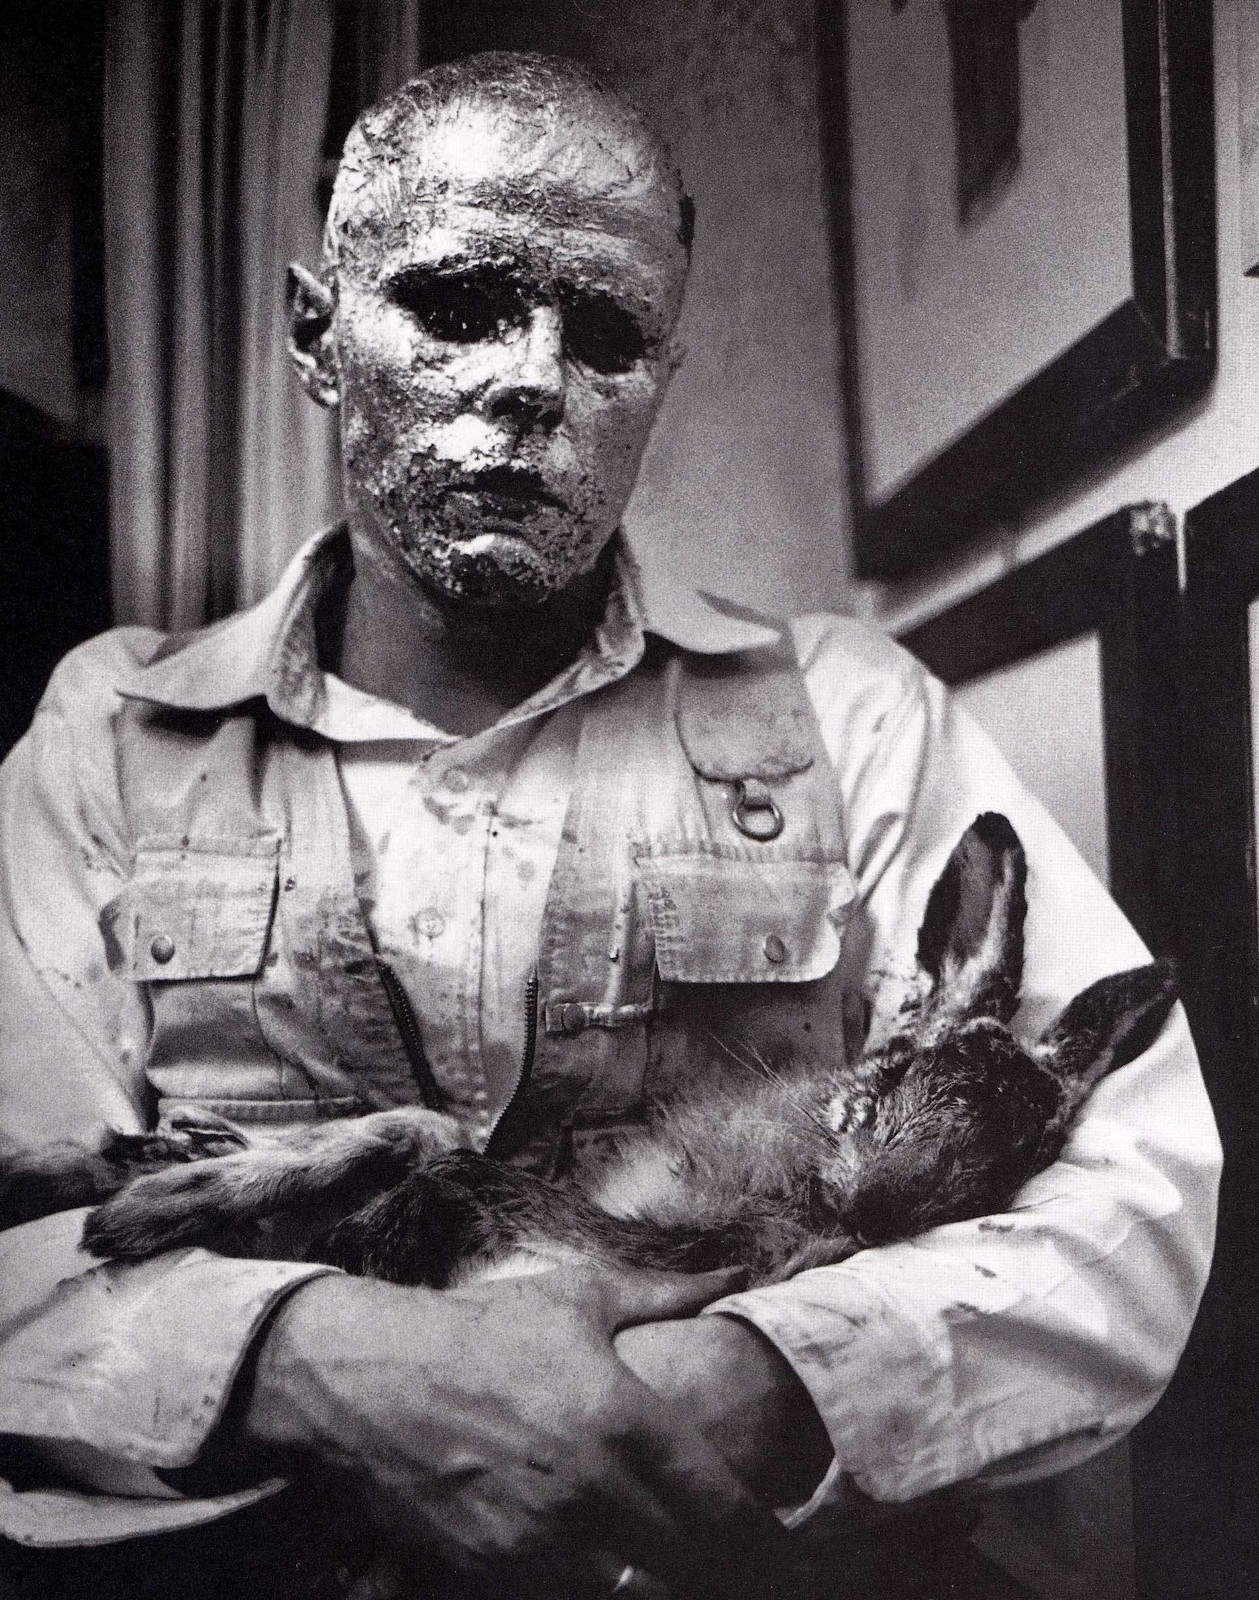 Joseph Beuys. How to Explain Pictures to a Dead Hare. 1965, November. Performance in Gallery Schmela, Dusseldorf